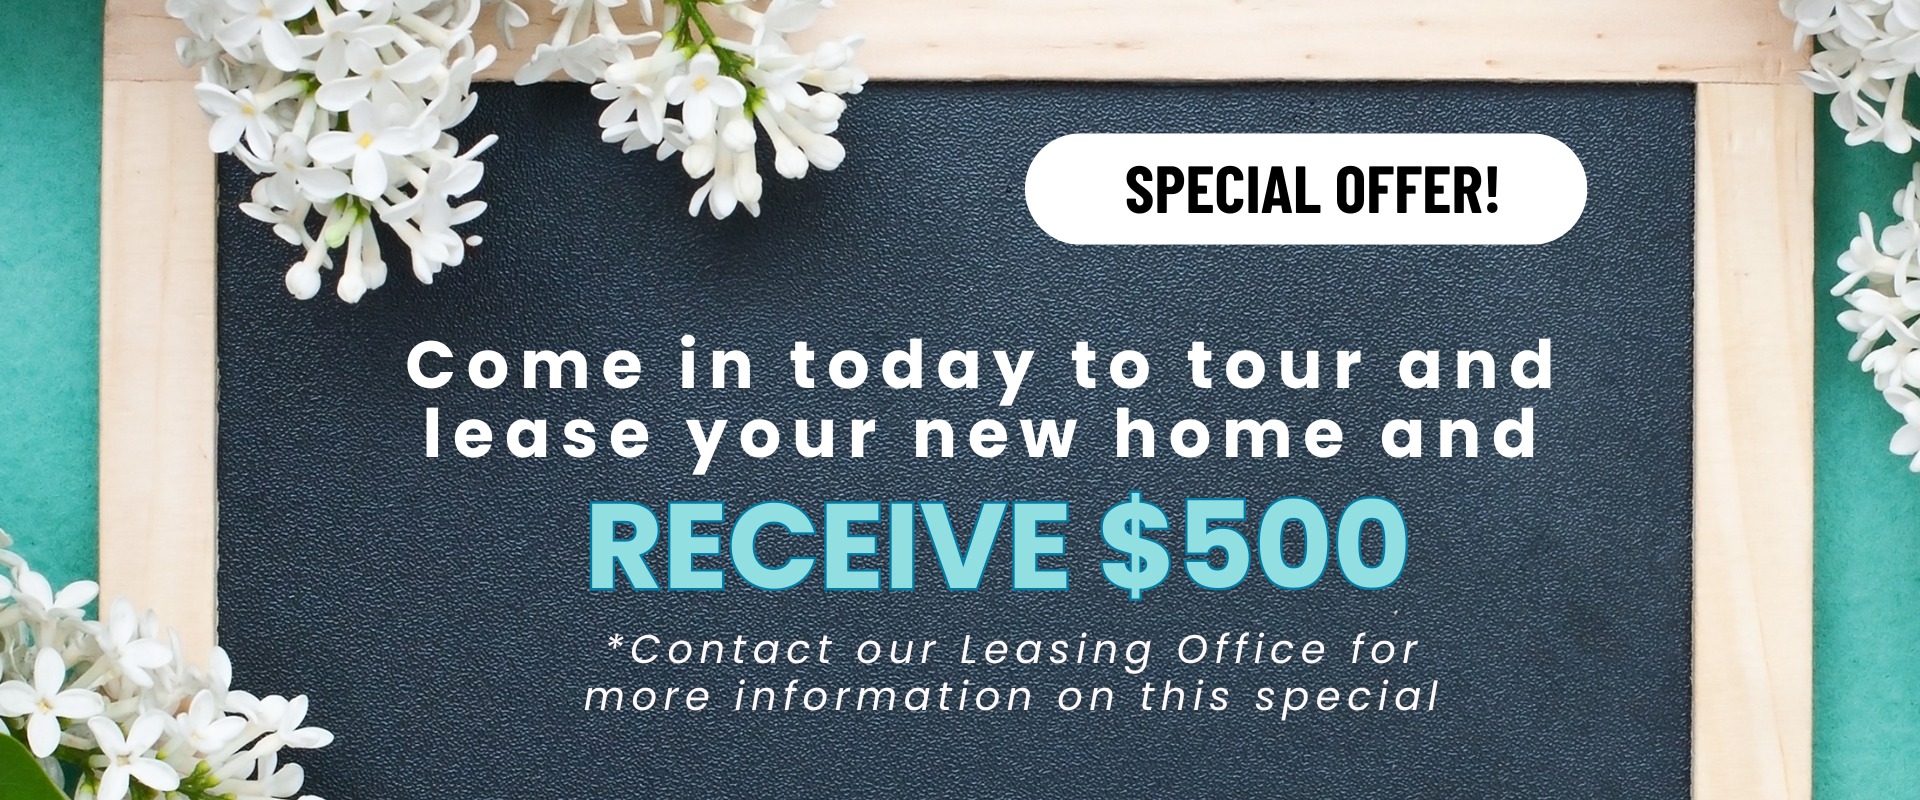 Come in today to tour and lease your new home and receive $500 *Contact our Leasing Office for more information on this special